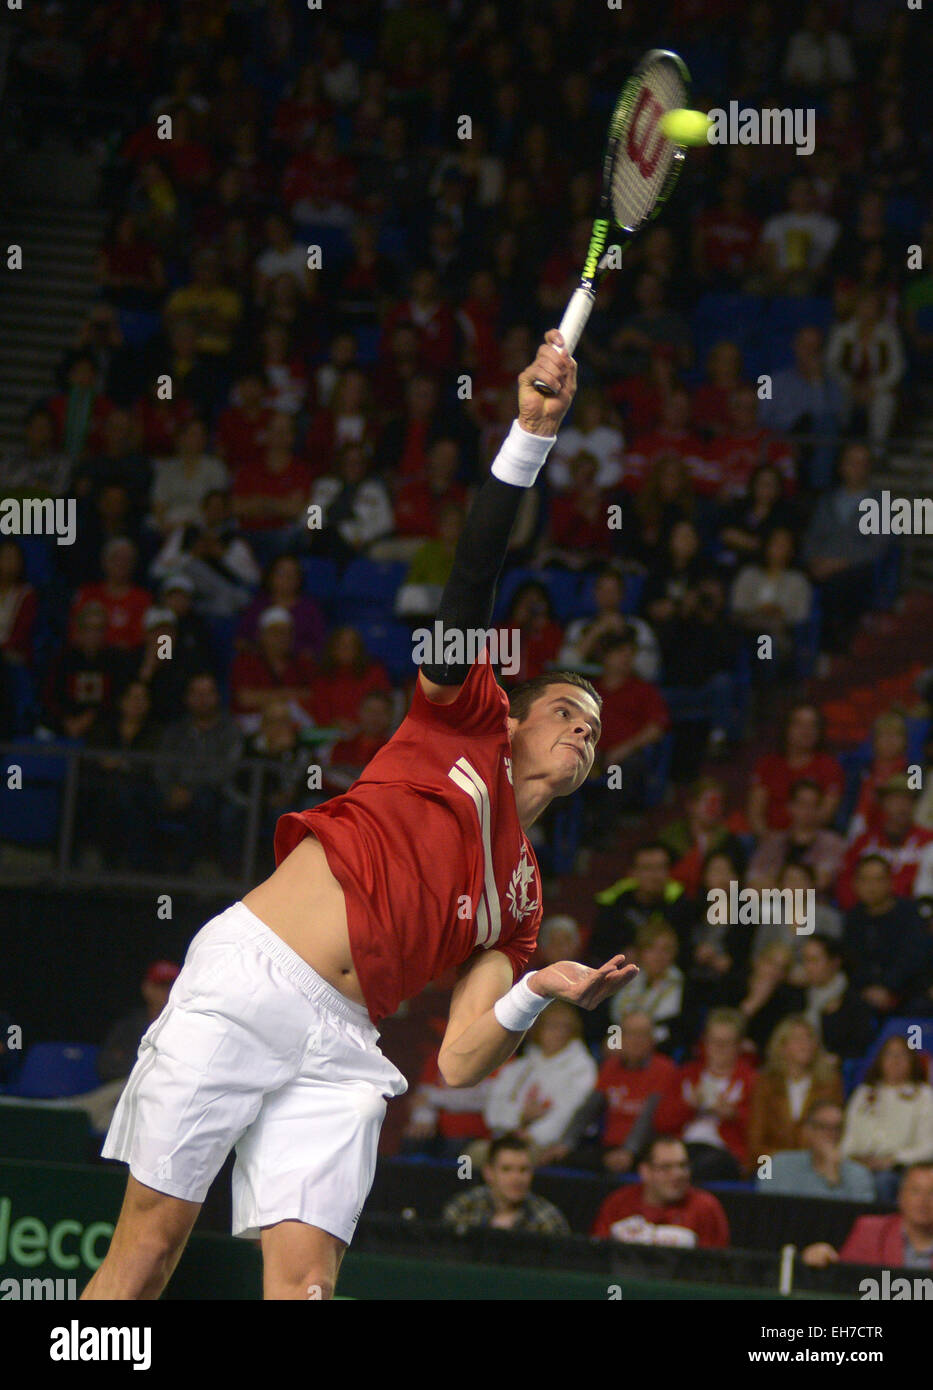 Vancouver, Canada. 8th Mar, 2015. Canada's Milos Raonic serves the ball to Japan's Kei Nishikori during their match at Davis Cup tennis tournament in Vancouver, Canada, March 8, 2015. Nishikori defeated Raonic 3-2 during final day of best-of-five World Group showdown. Credit:  Sergei Bachlakov/Xinhua/Alamy Live News Stock Photo